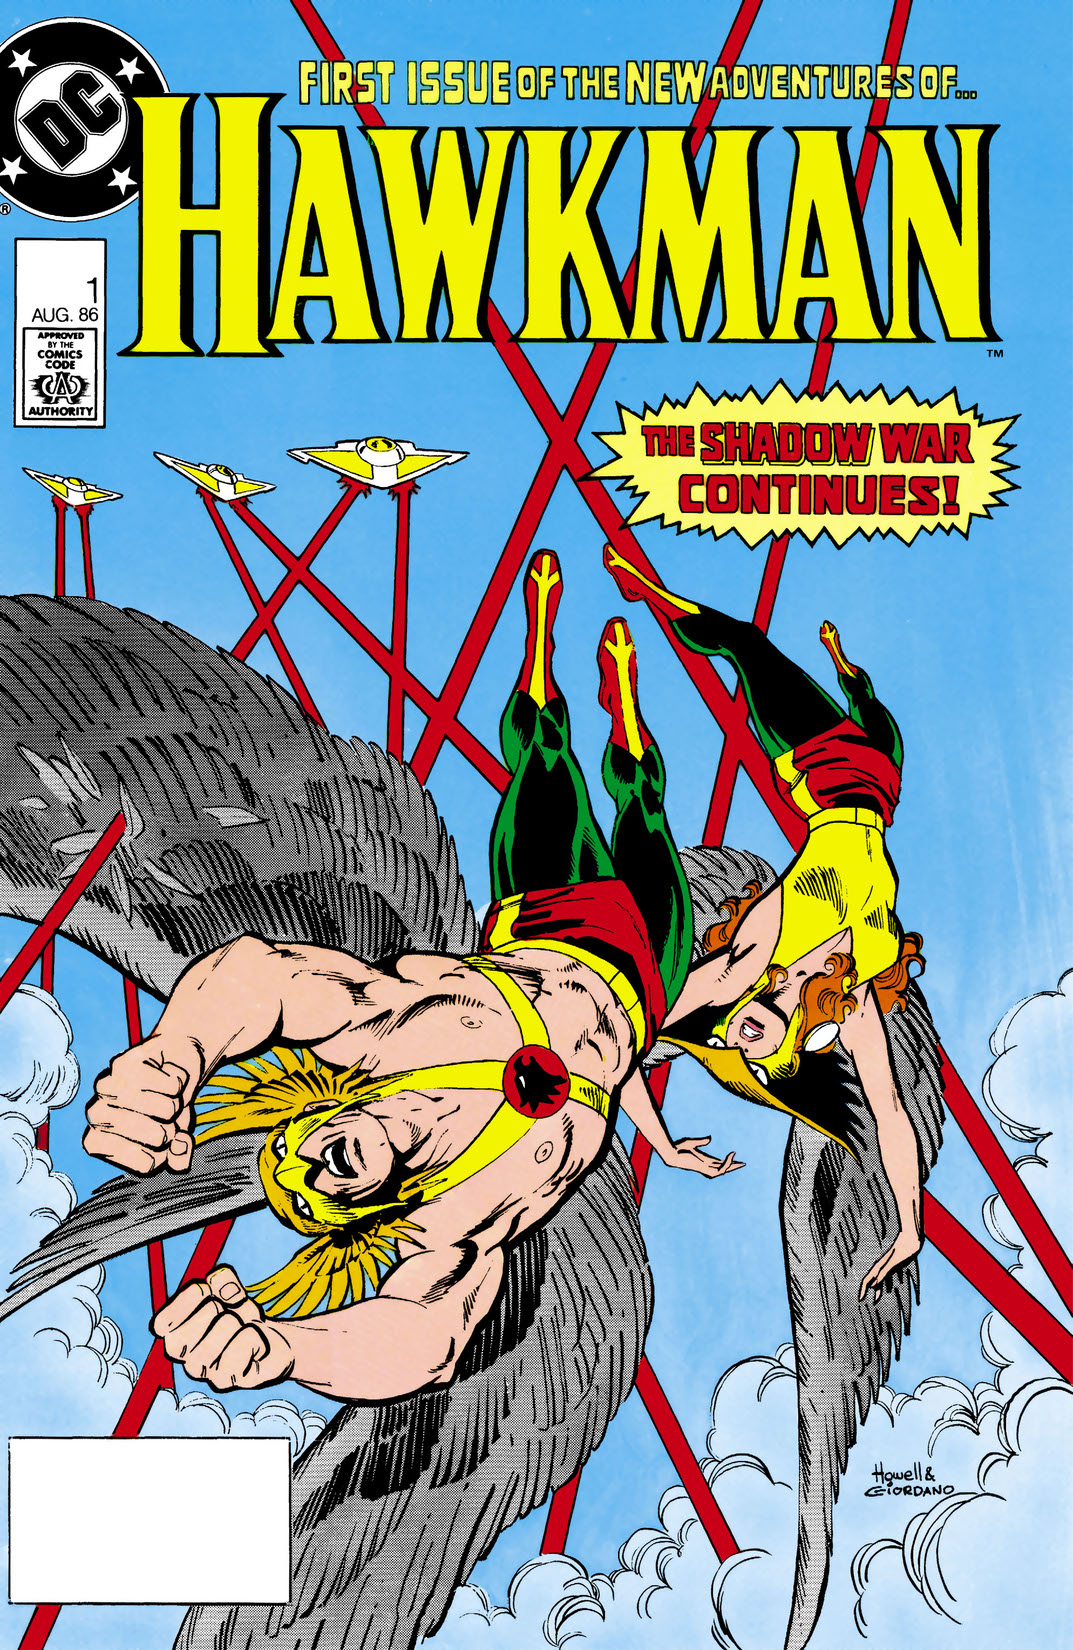 Hawkman (1986-) #1 preview images